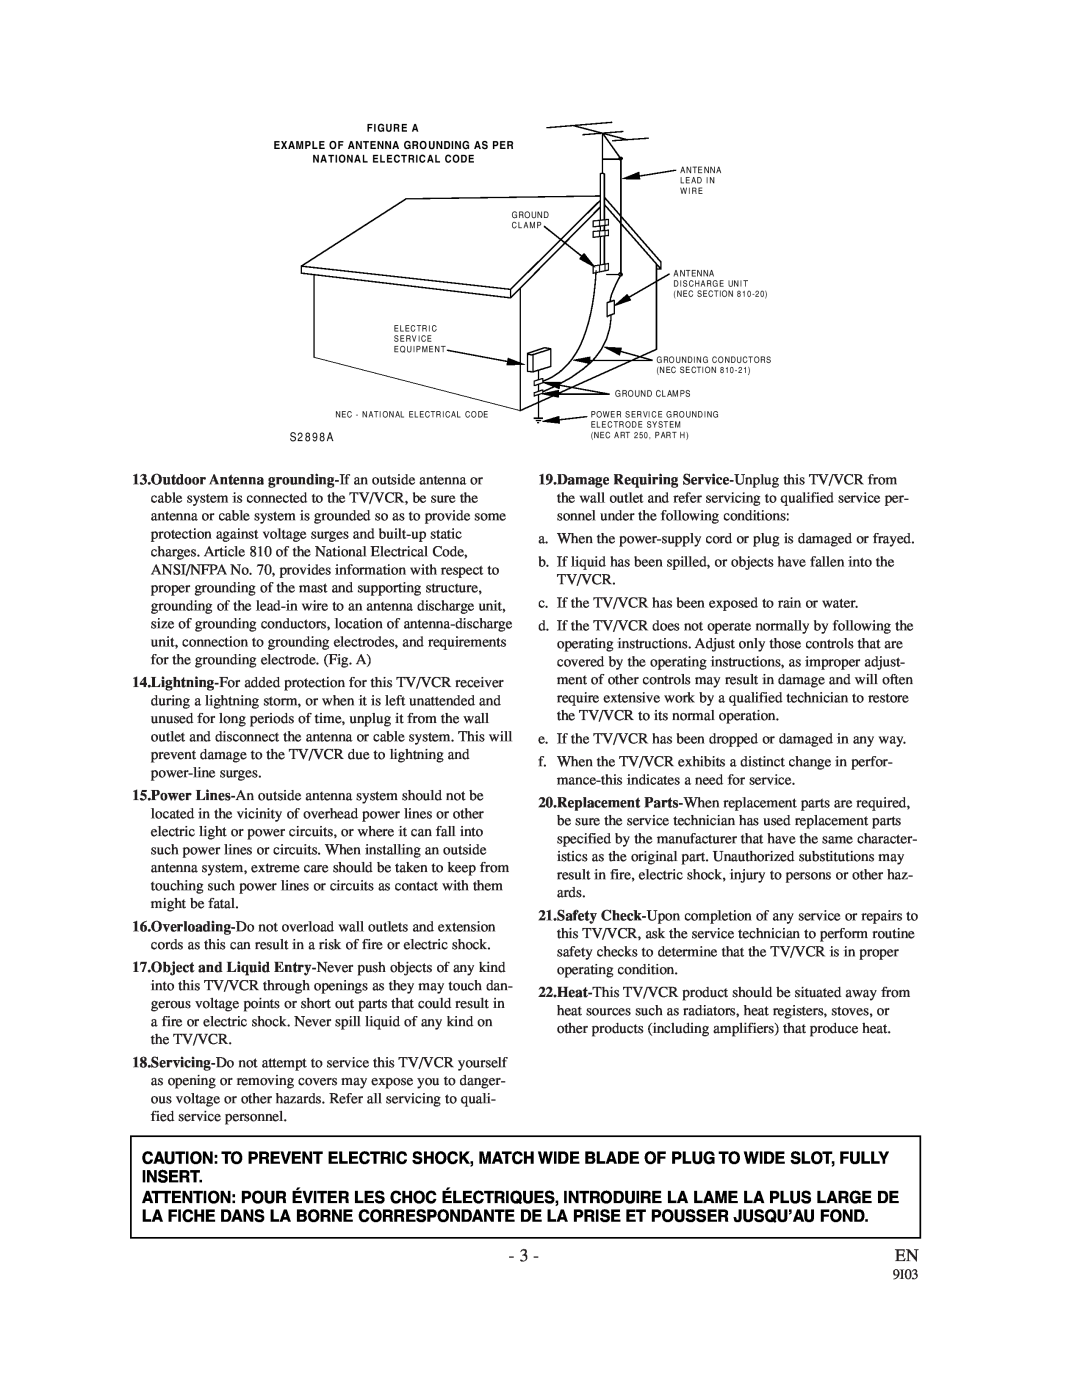 Sylvania 6313CC owner manual S2 8 9 8 A, Figure A Example Of Antenna Grounding As Per National Electrical Code 